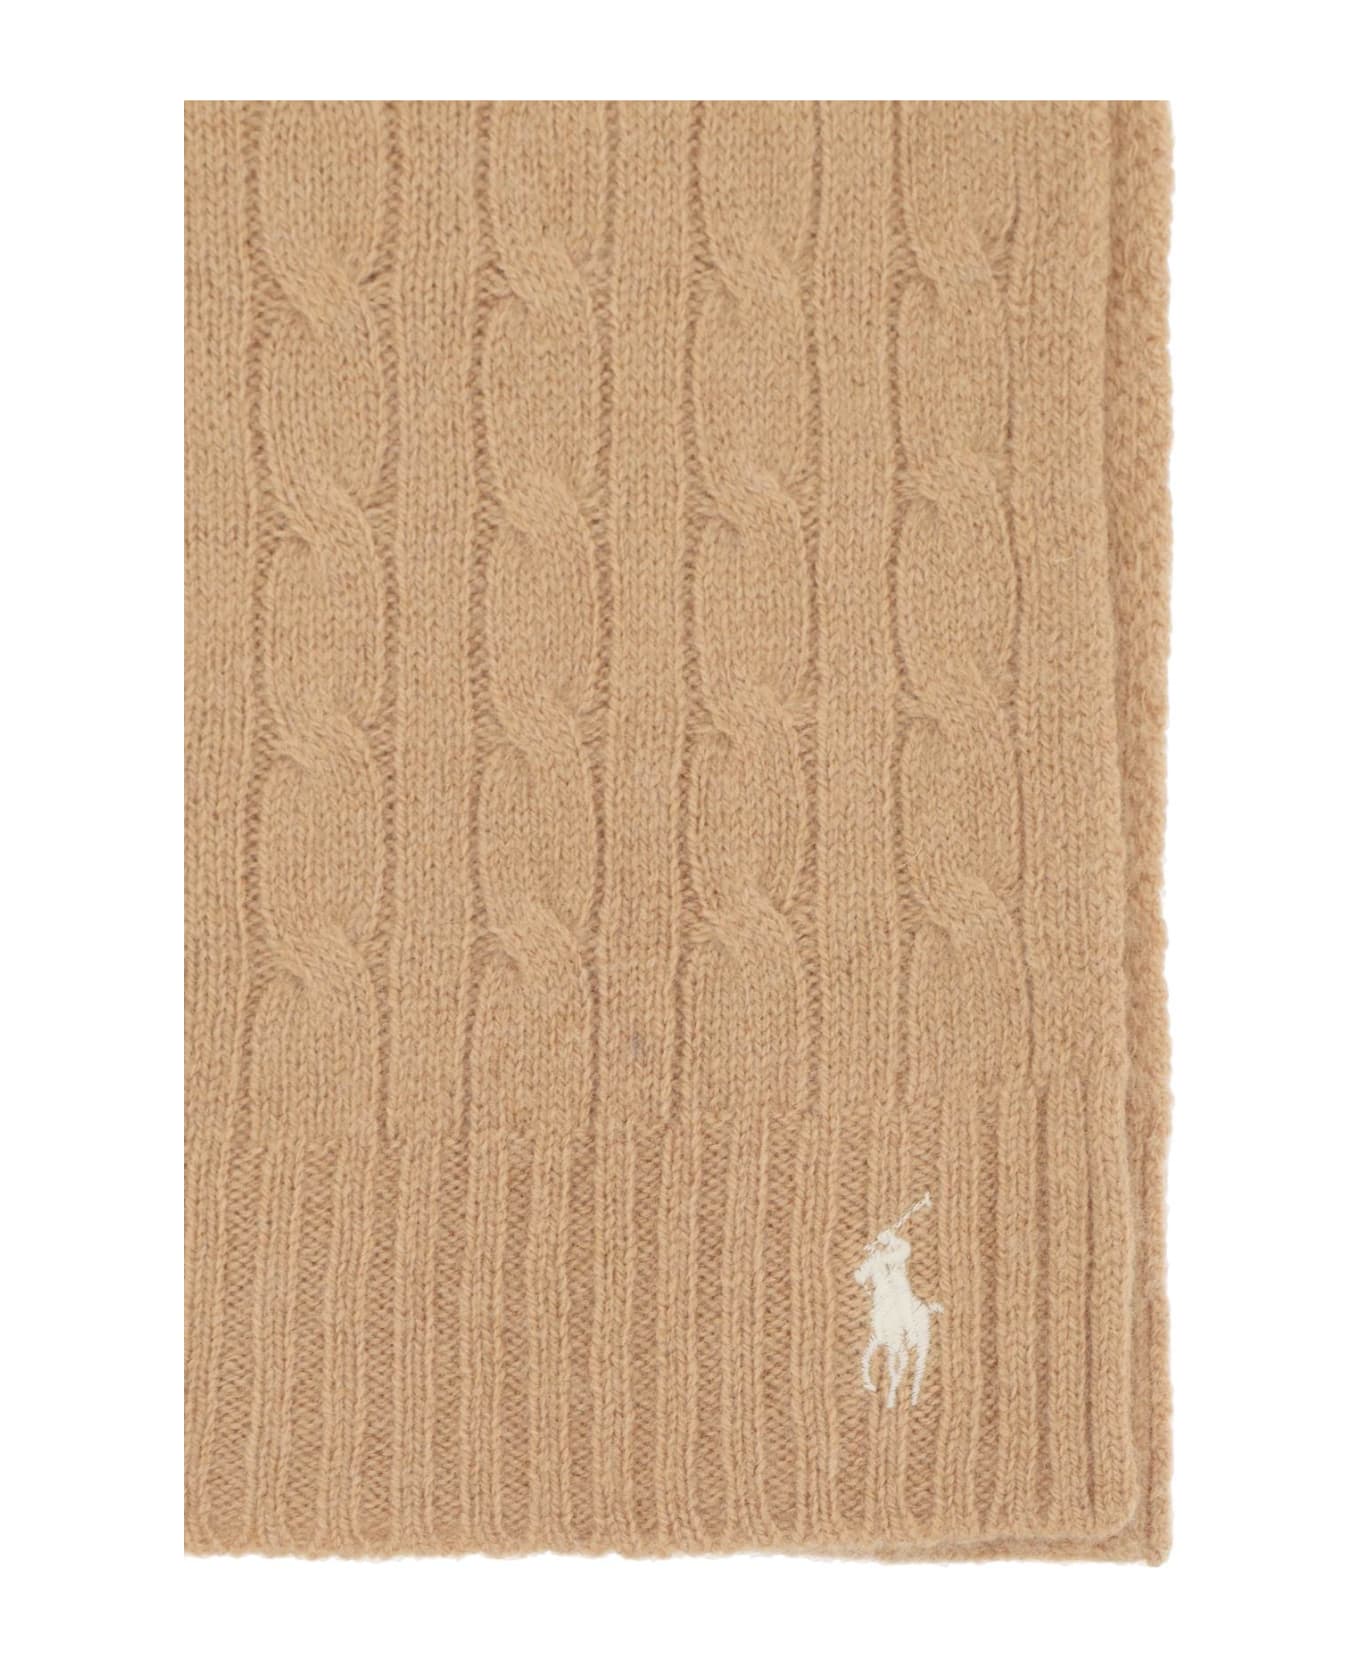 Polo Ralph Lauren Wool And Cashmere Cable-knit Scarf - CAMEL (Beige) スカーフ＆ストール